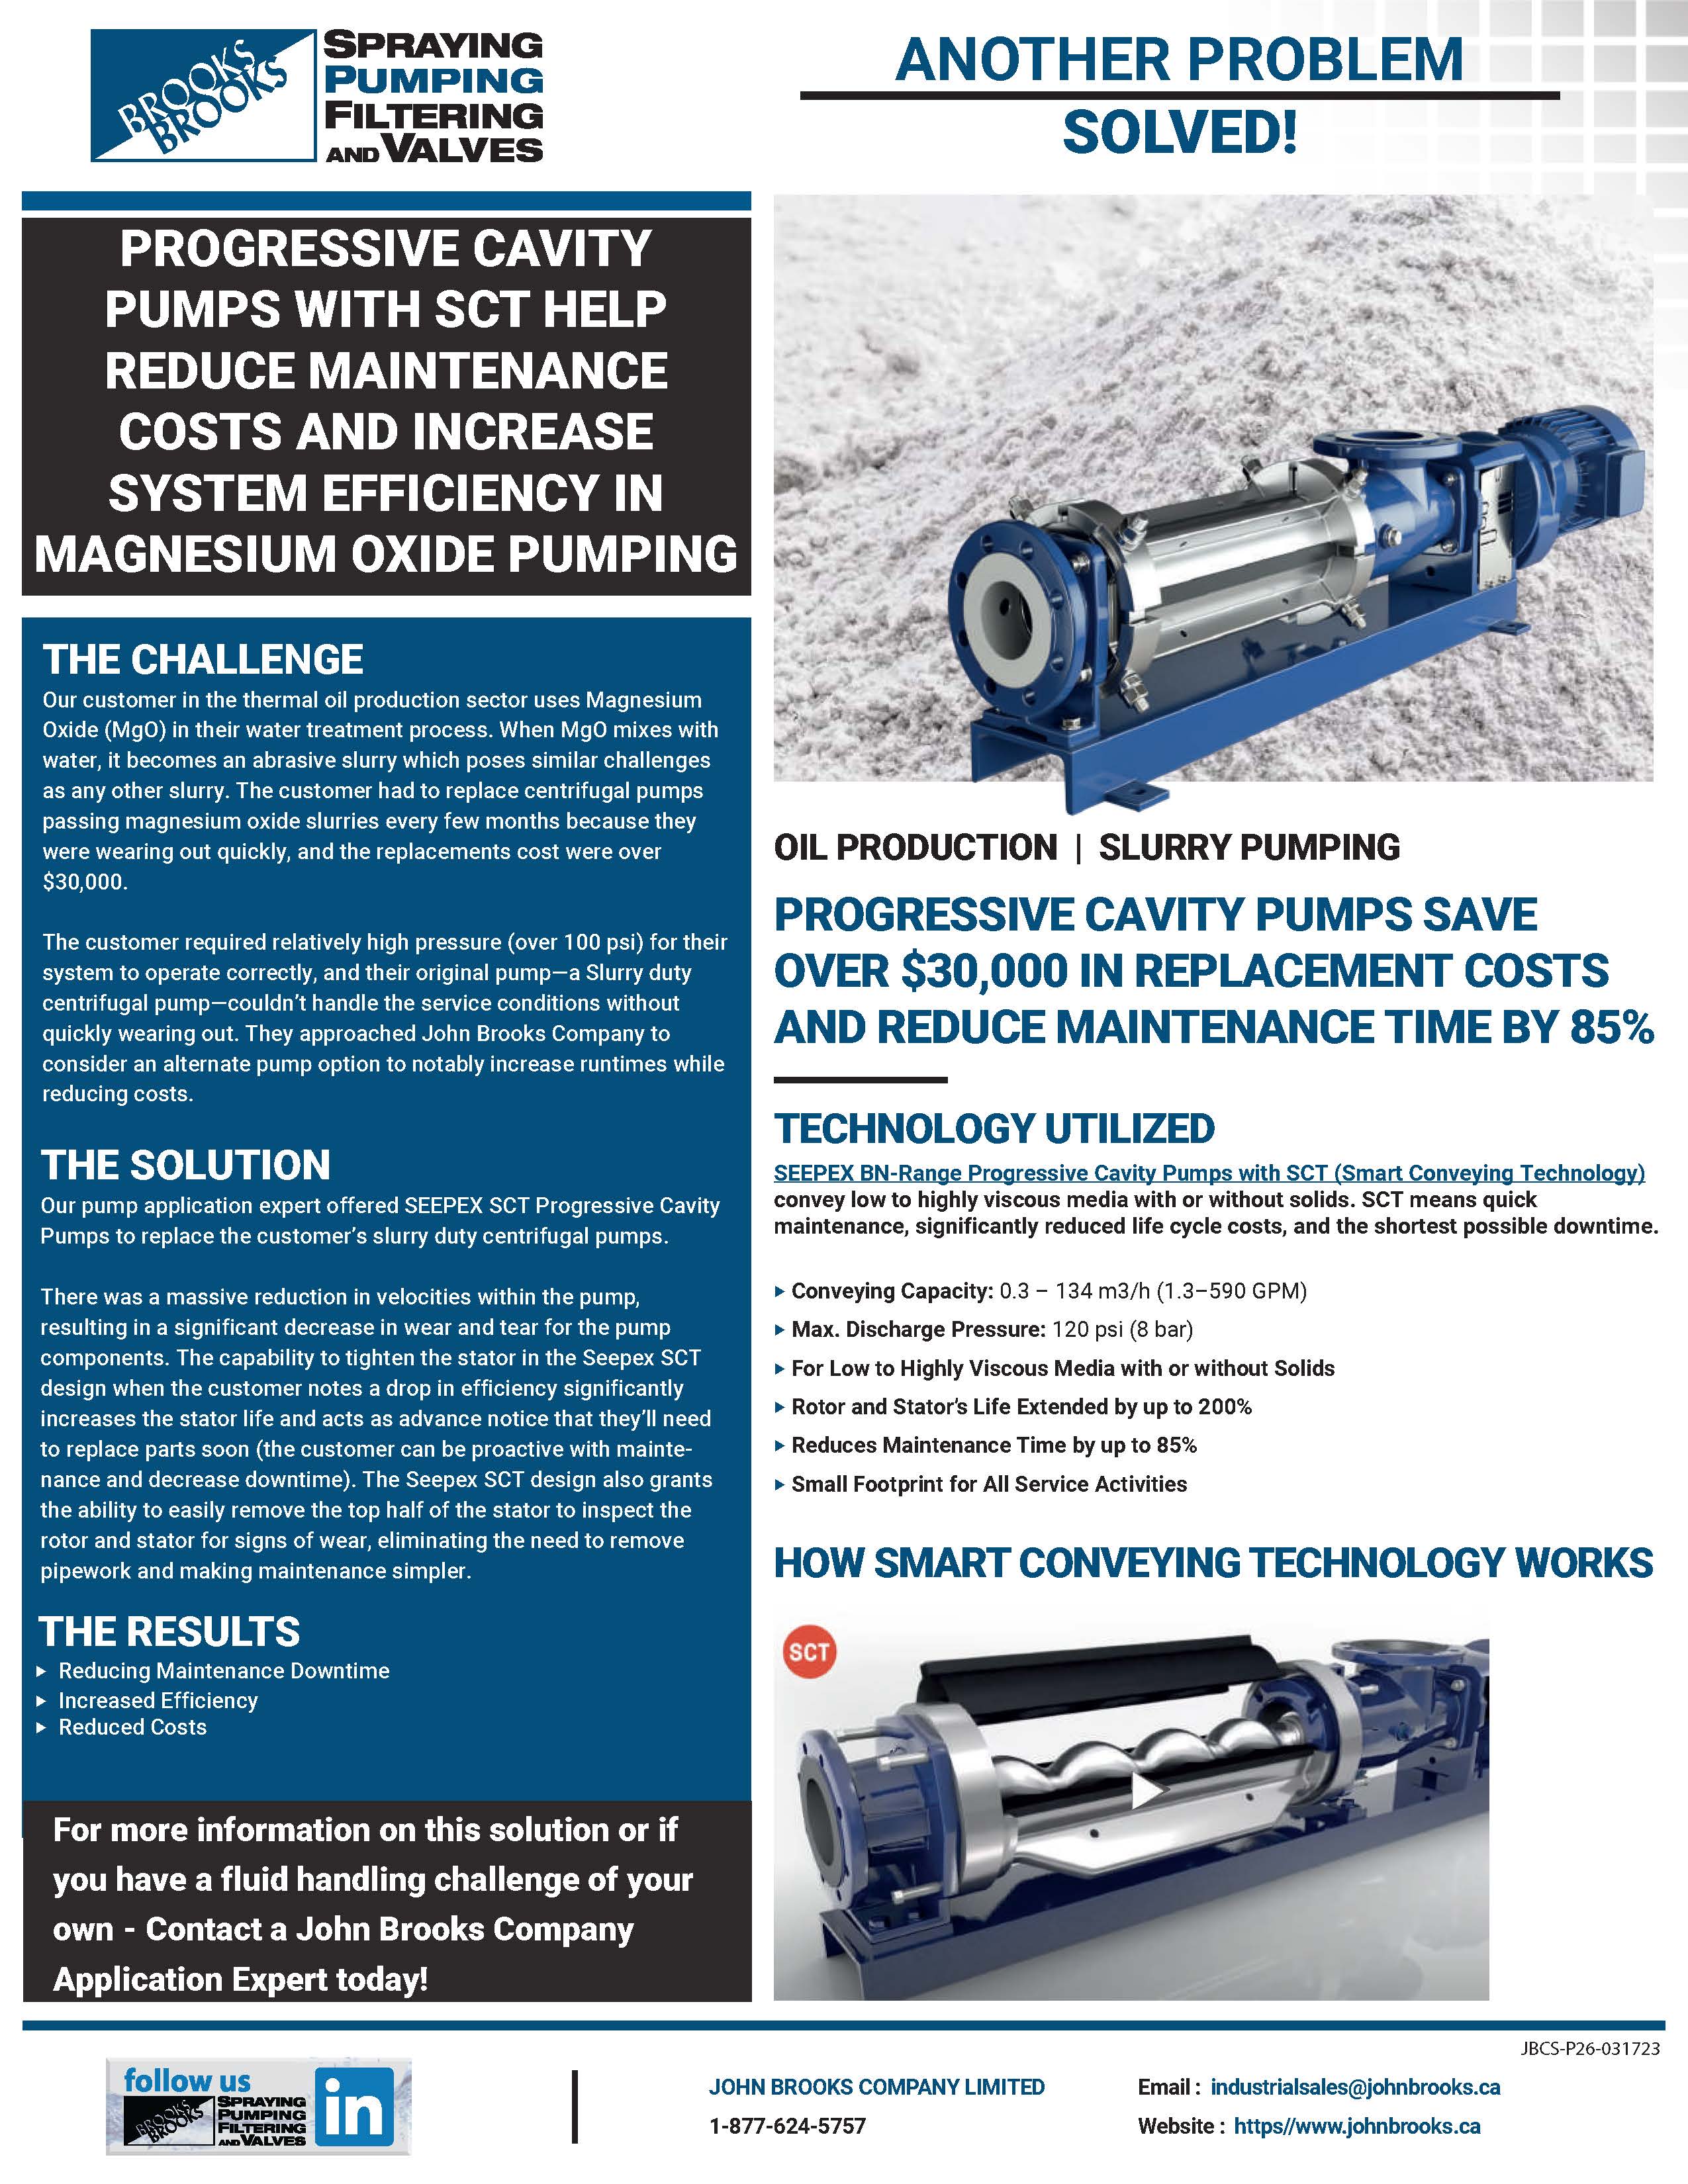 SEEPEX Progressive Cavity Pumps Help Reduce Maintenance Cost and Downtime in Magnesium Oxide Pumping